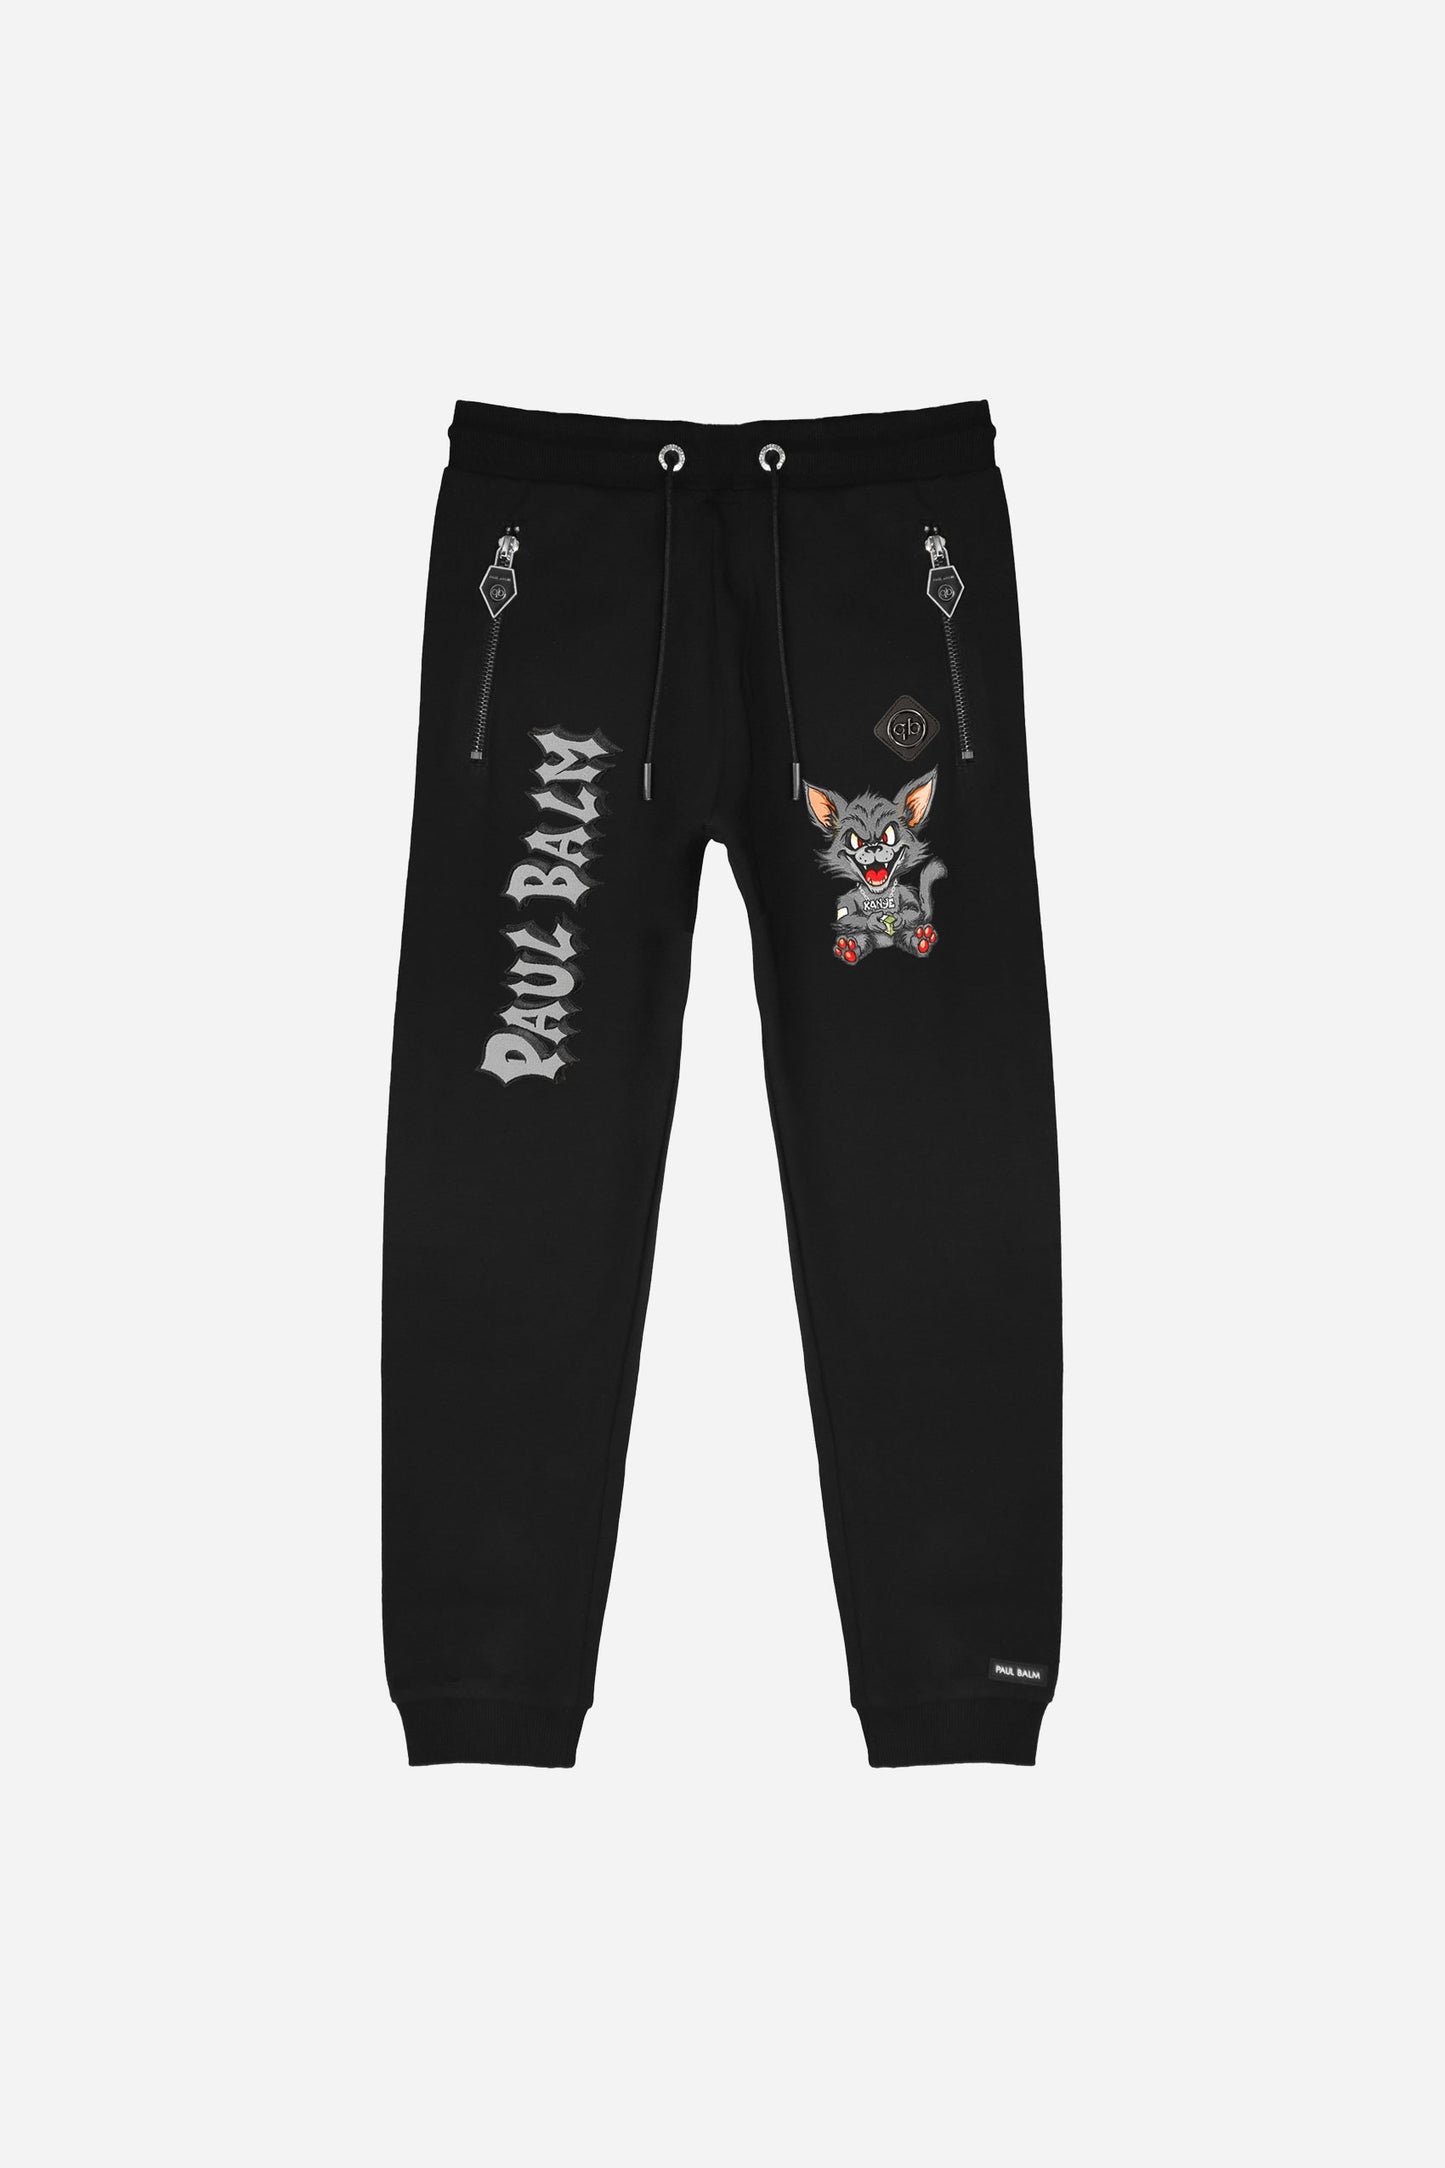 Embroidered Black Kanye Pants - Limited to 300